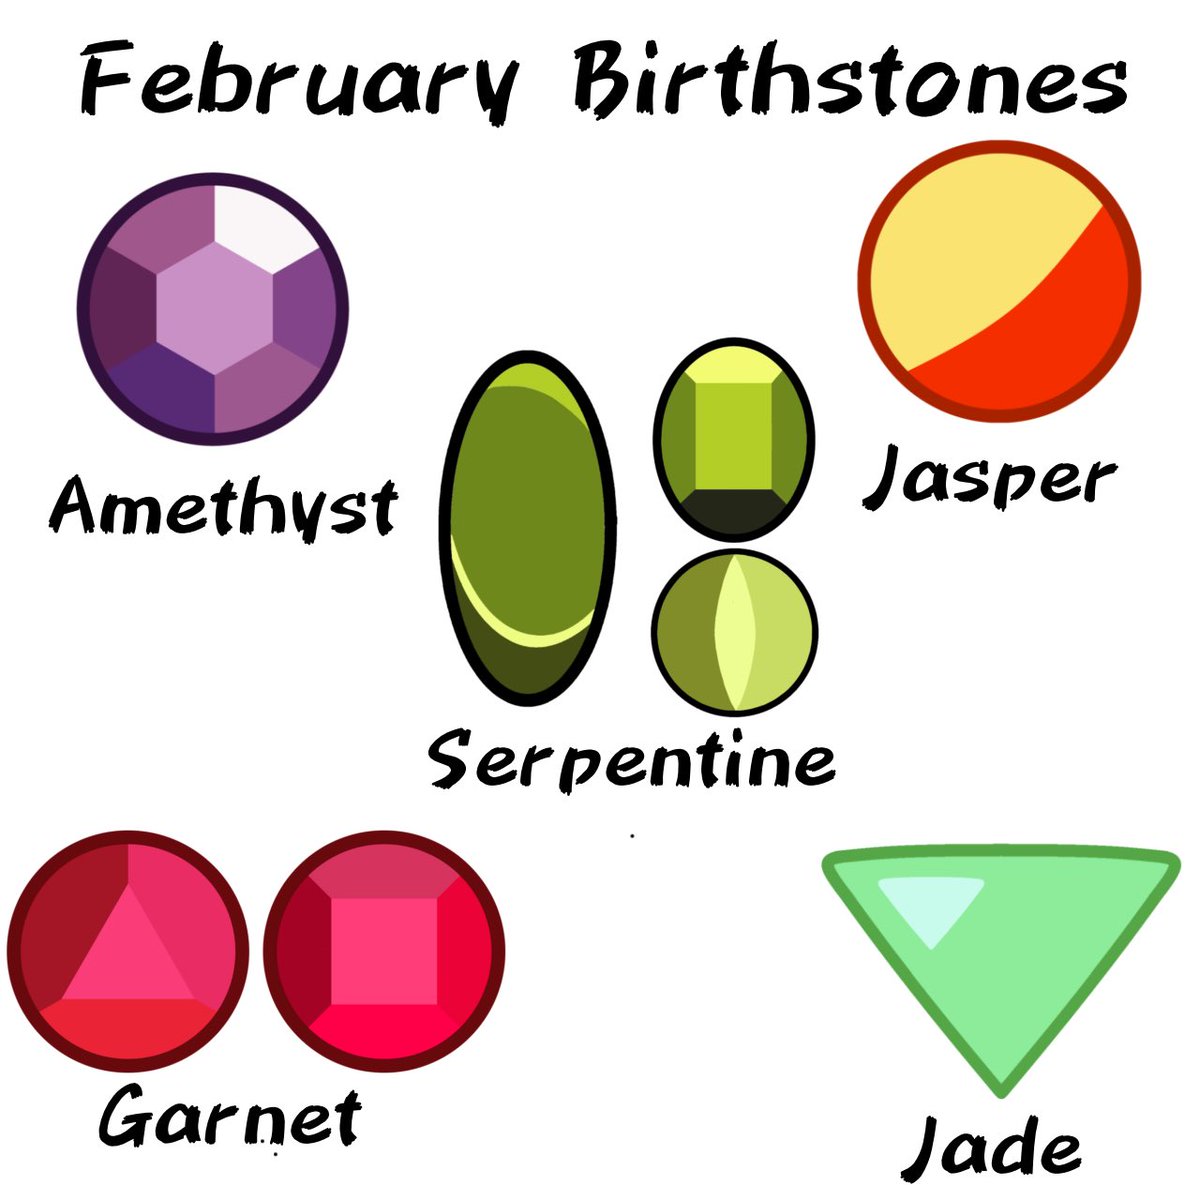 The Birthstones of February.